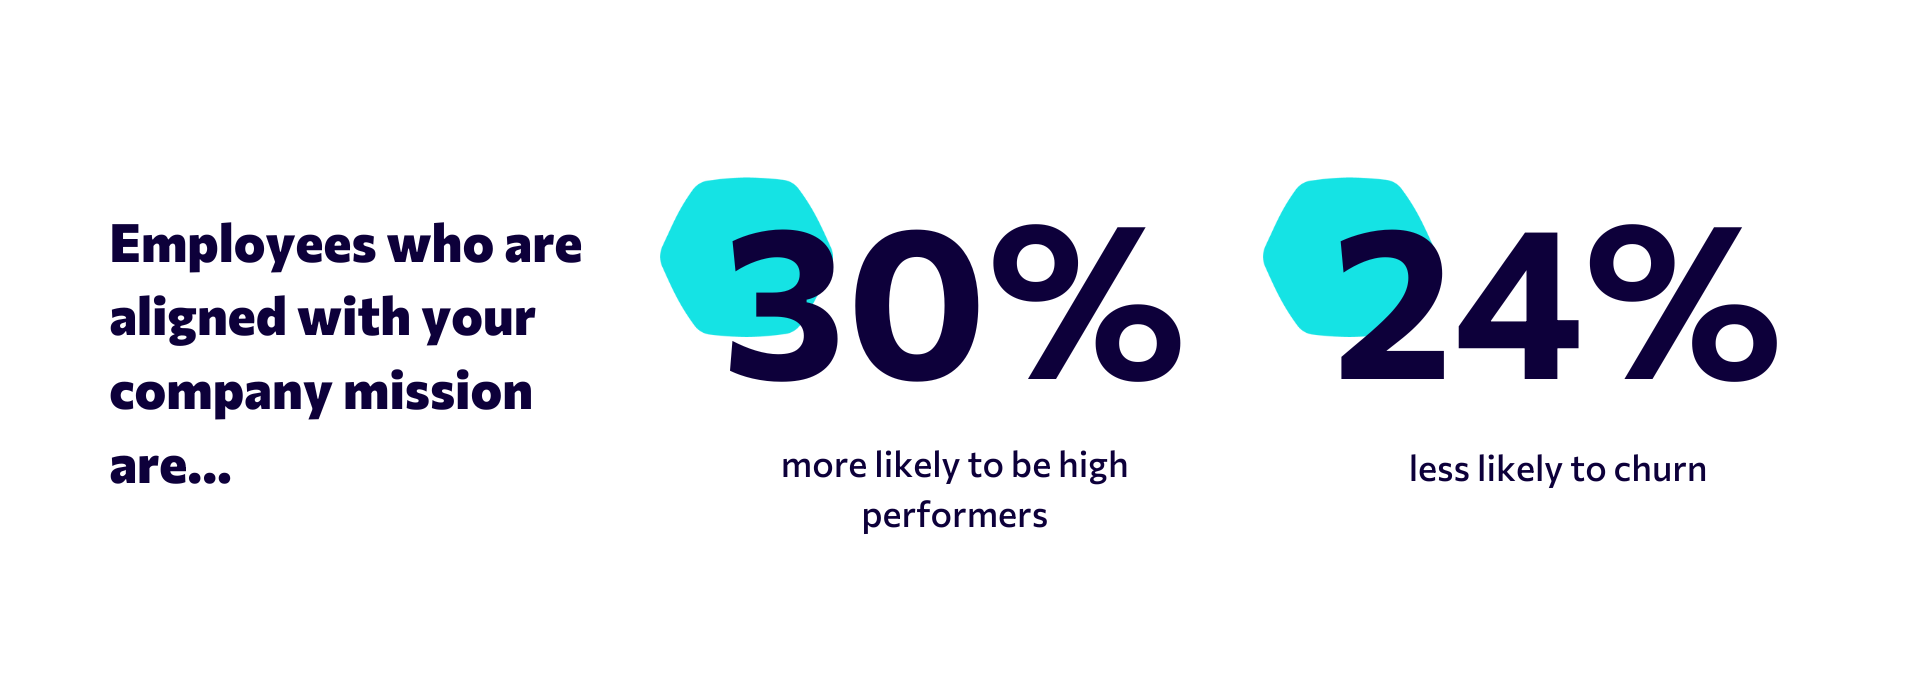 Mission-aligned employees are 30% more likely to be high performers and 24% less likely to churn